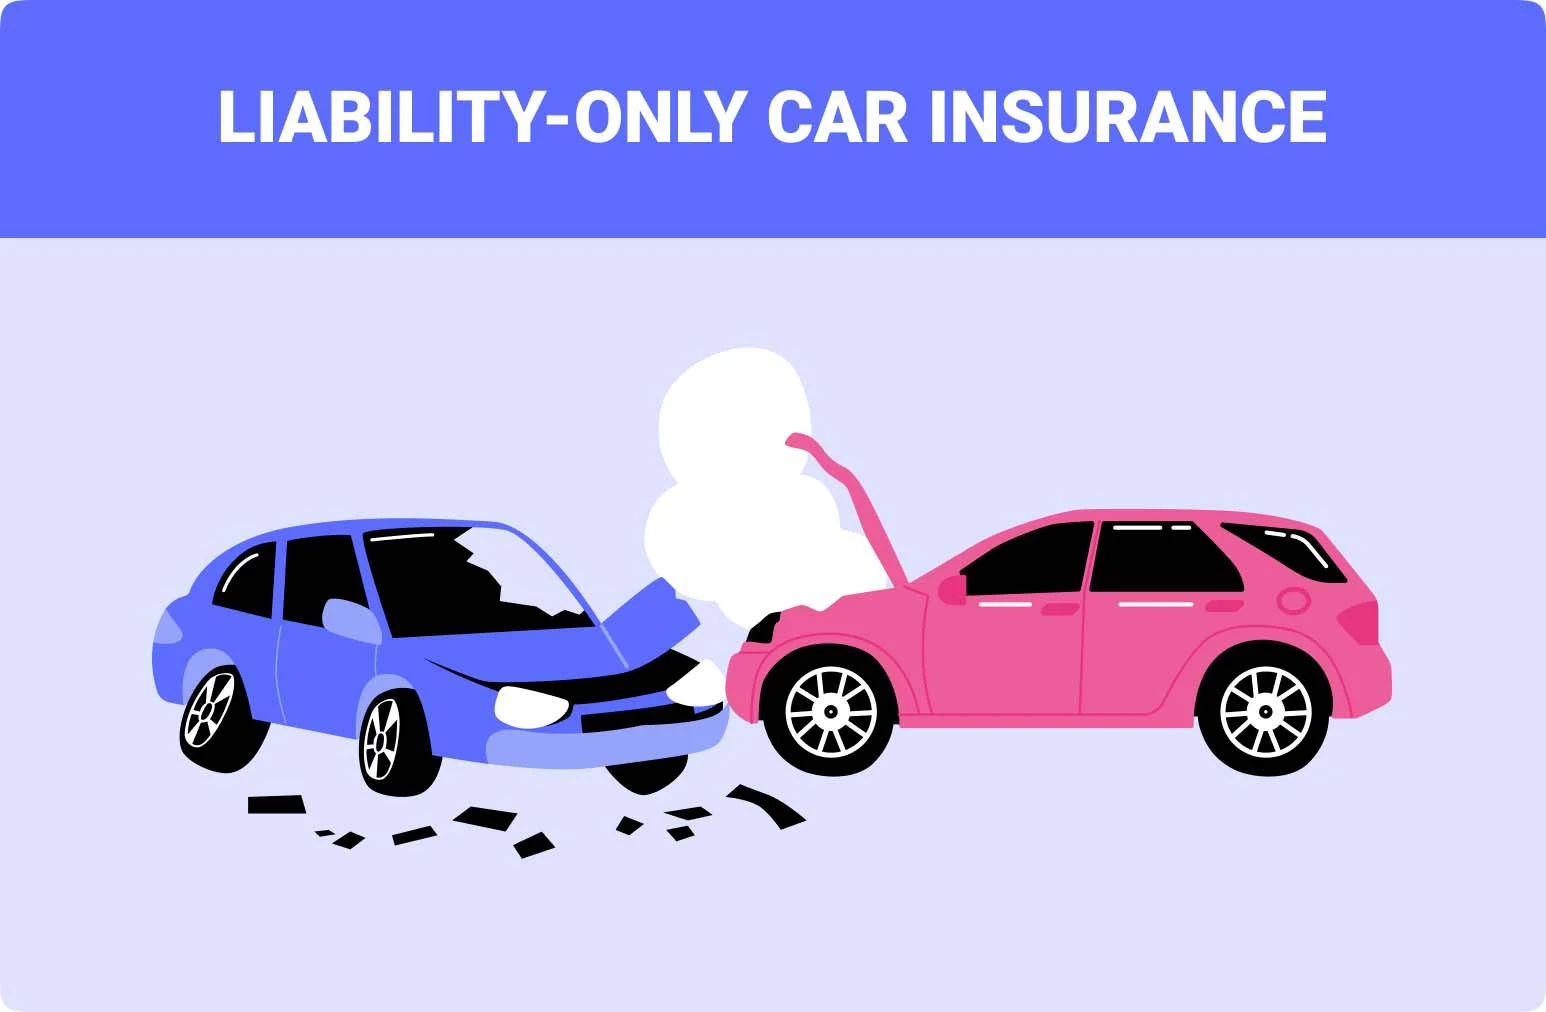 Liability-only car insurance